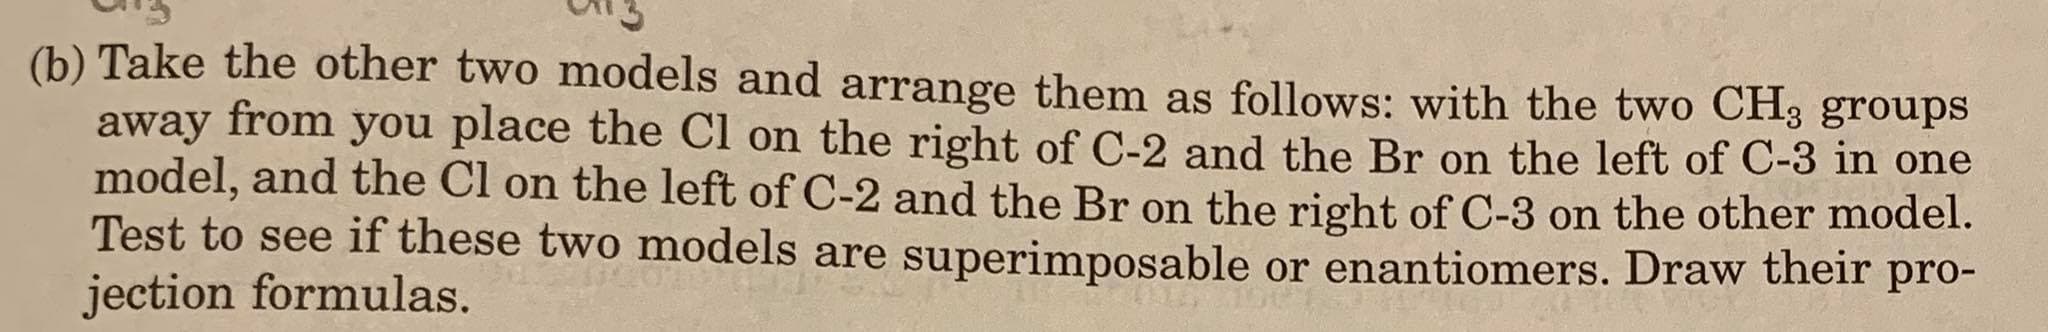 (b) Take the other two models and arrange them as follows: with the two CH3 groups
away from you place the Cl on the right of C-2 and the Br on the left of C-3 in one
model, and the Cl on the left of C-2 and the Br on the right of C-3 on the other model.
Test to see if these two models are superimposable or enantiomers. Draw their pro-
jection formulas.
